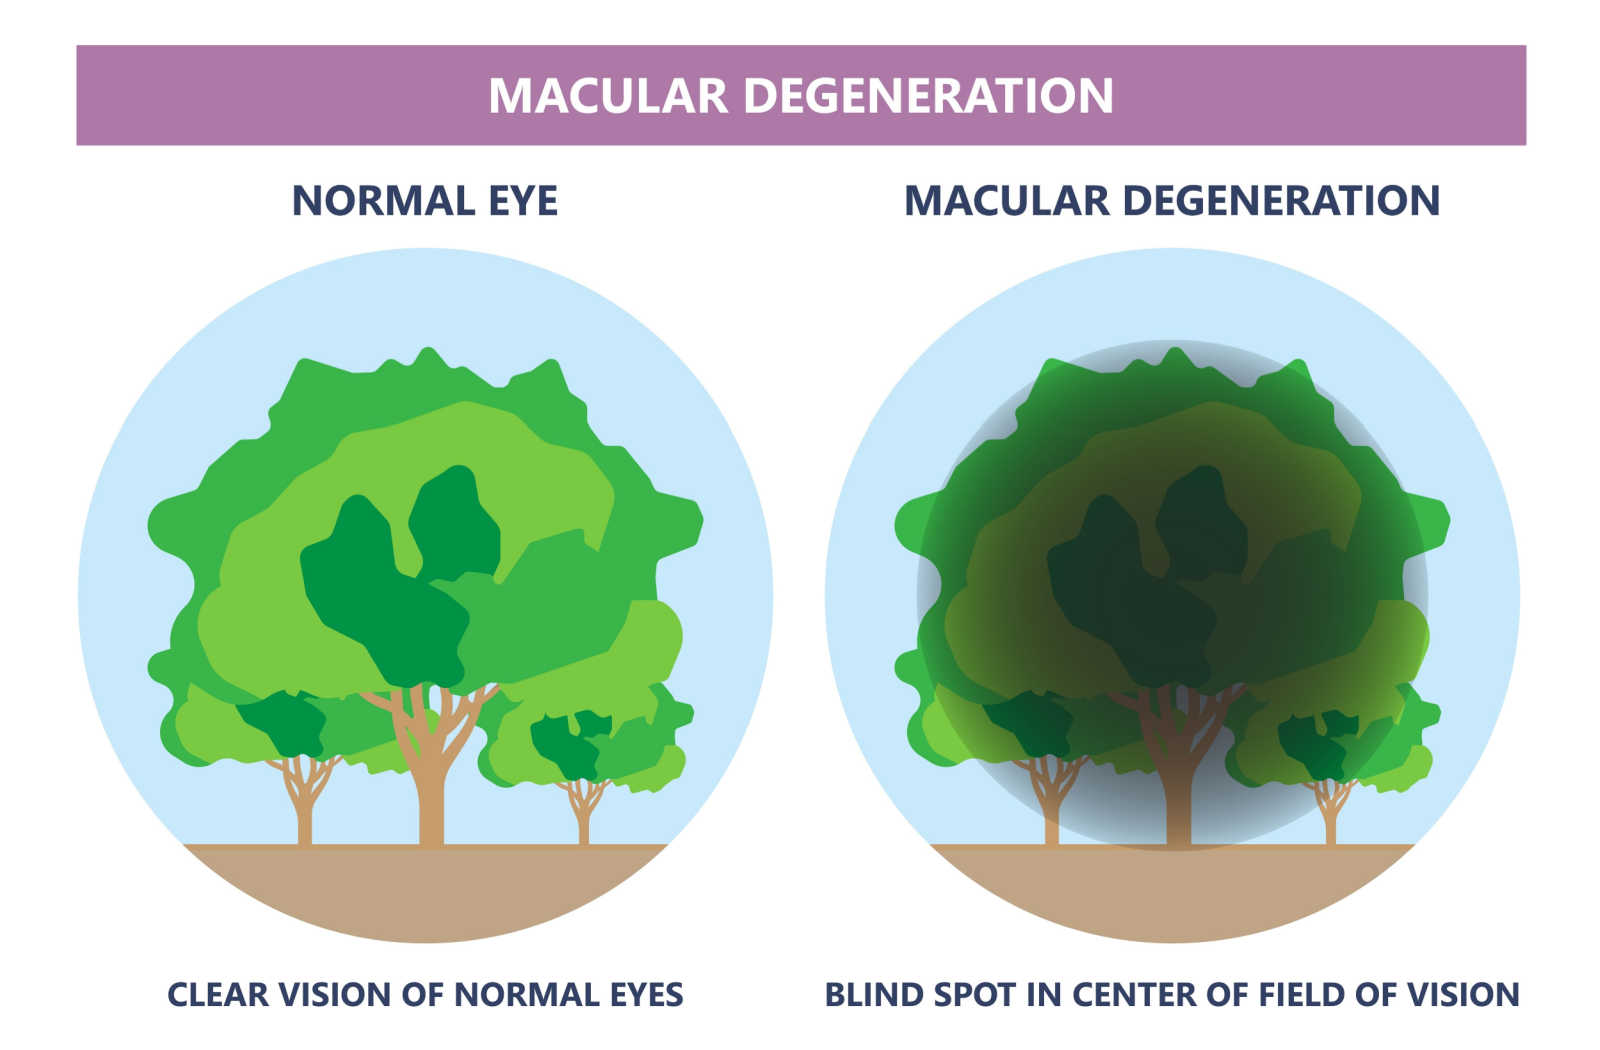 Graphical depiction of the sight of someone with a normal eye compared to macular degeneration.